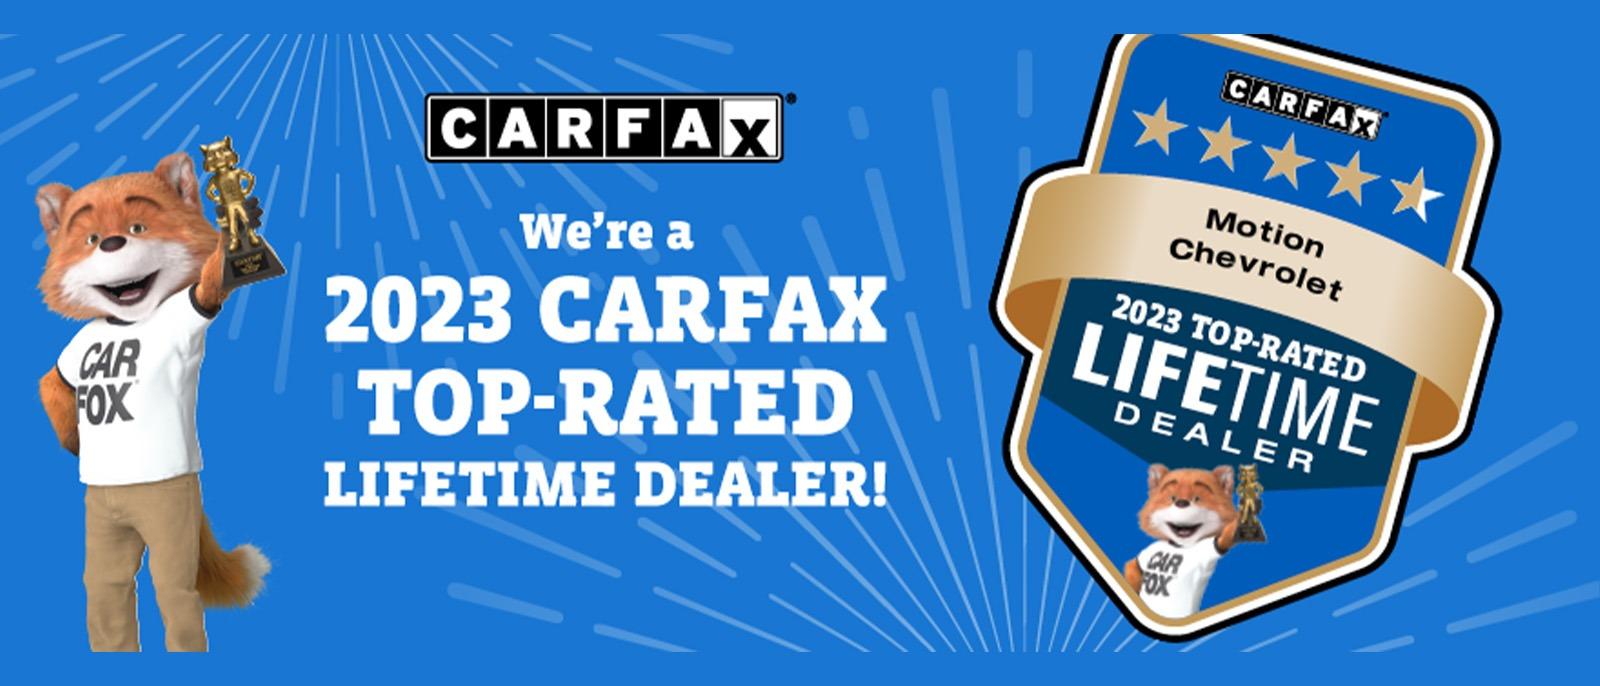 2023 CAFAX TOP-RATED DEALER